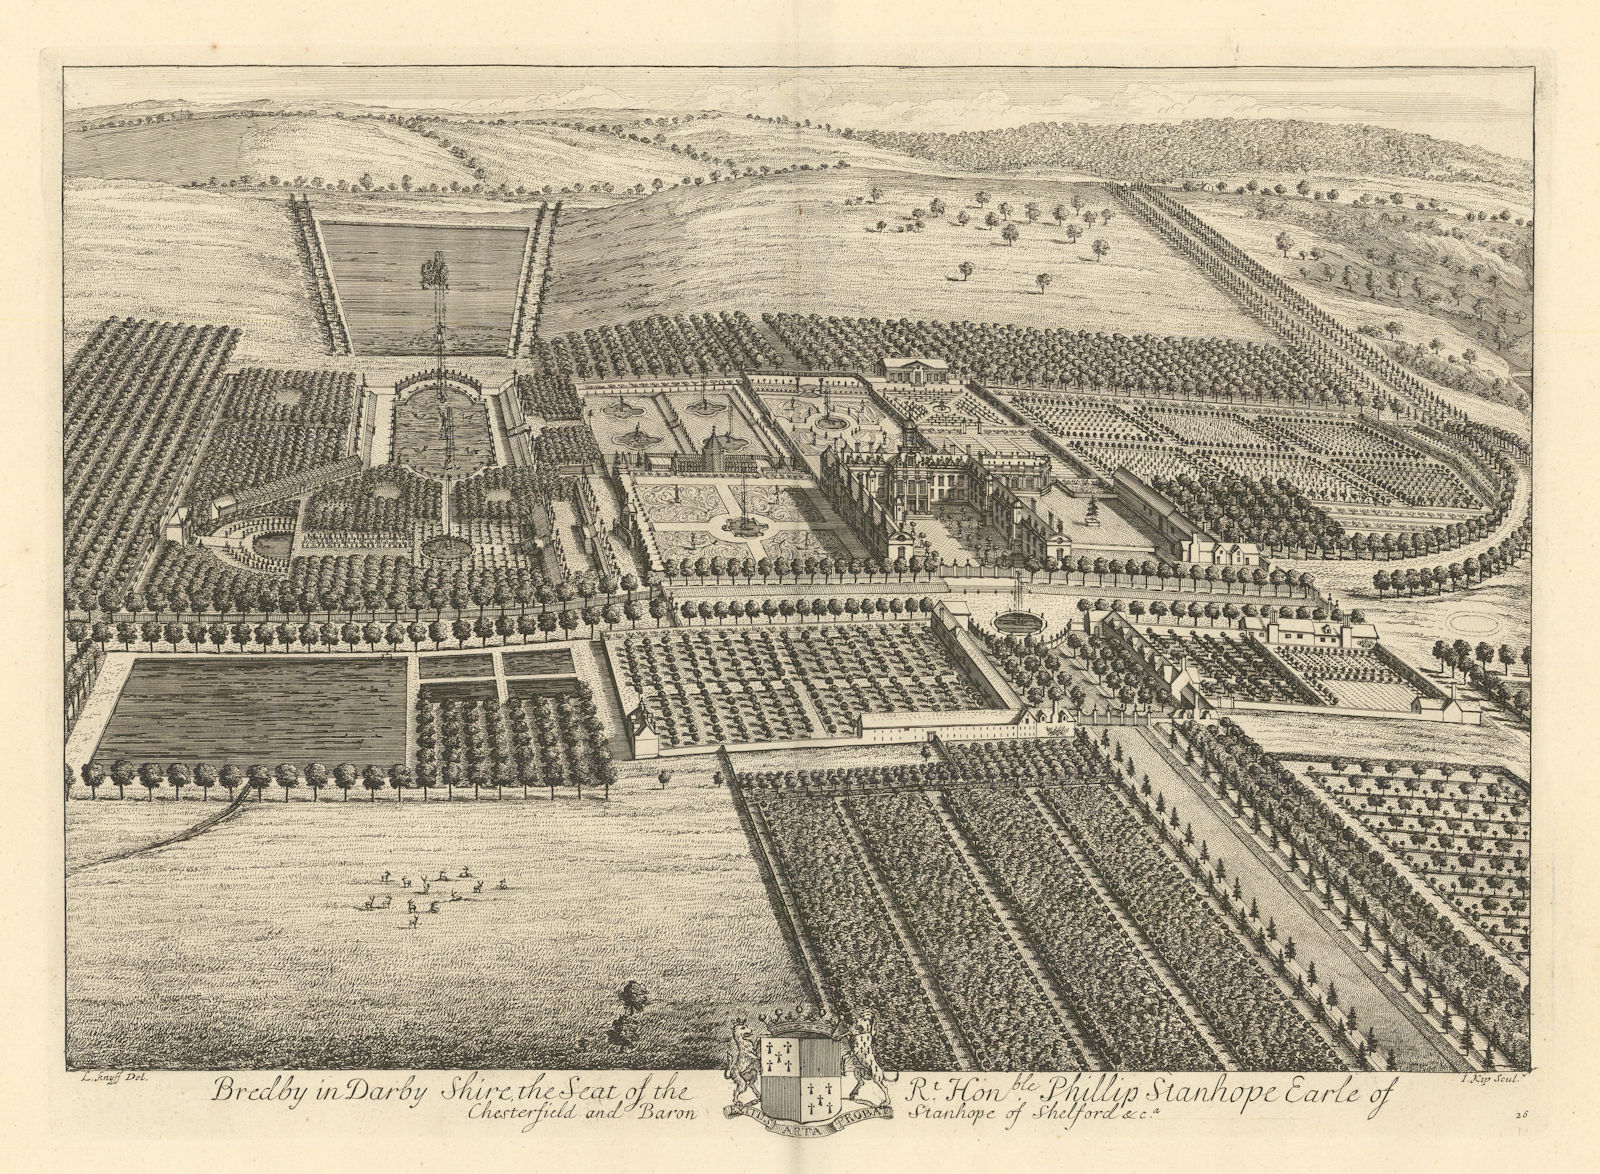 Associate Product Bretby Hall, Derbyshire by Kip & Knyff. "Bredby in Darbyshire". Stanhope 1709